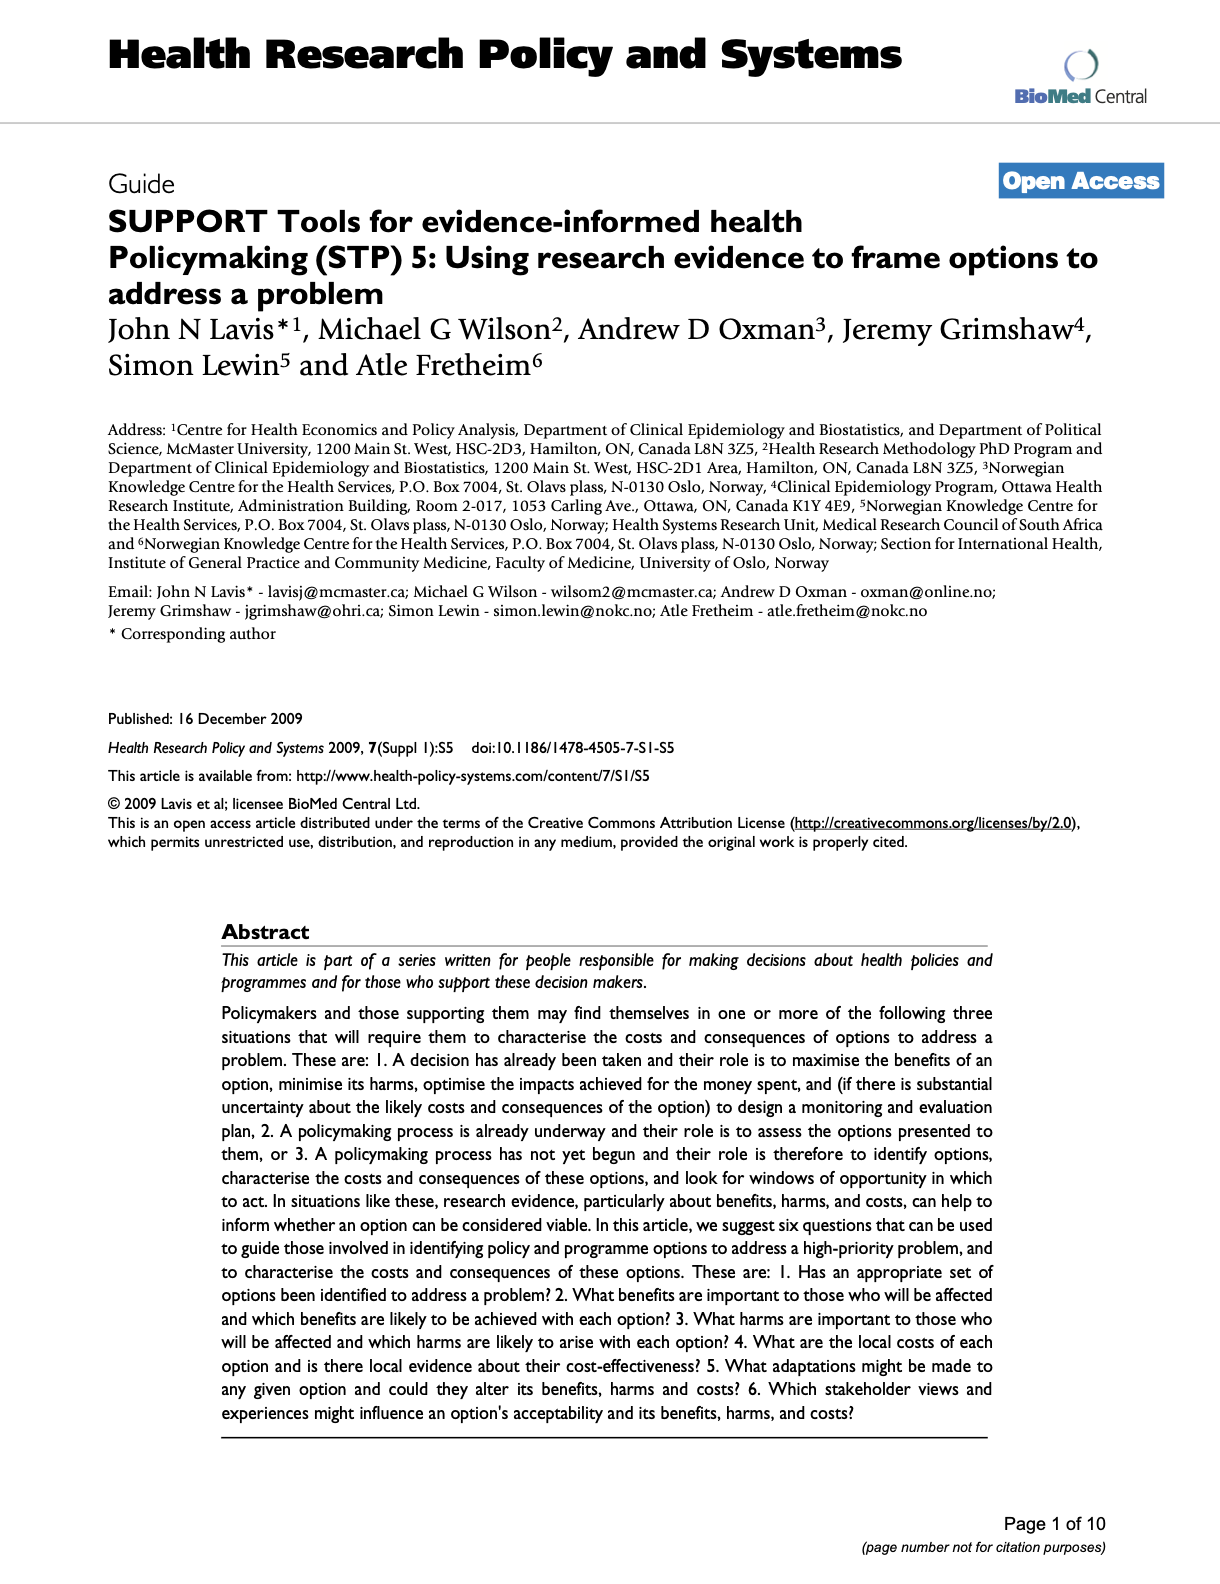 SUPPORT Tools for Evidence-Informed Health Policymaking (STP) 5: Using Research Evidence to Frame Options to Address a Problem